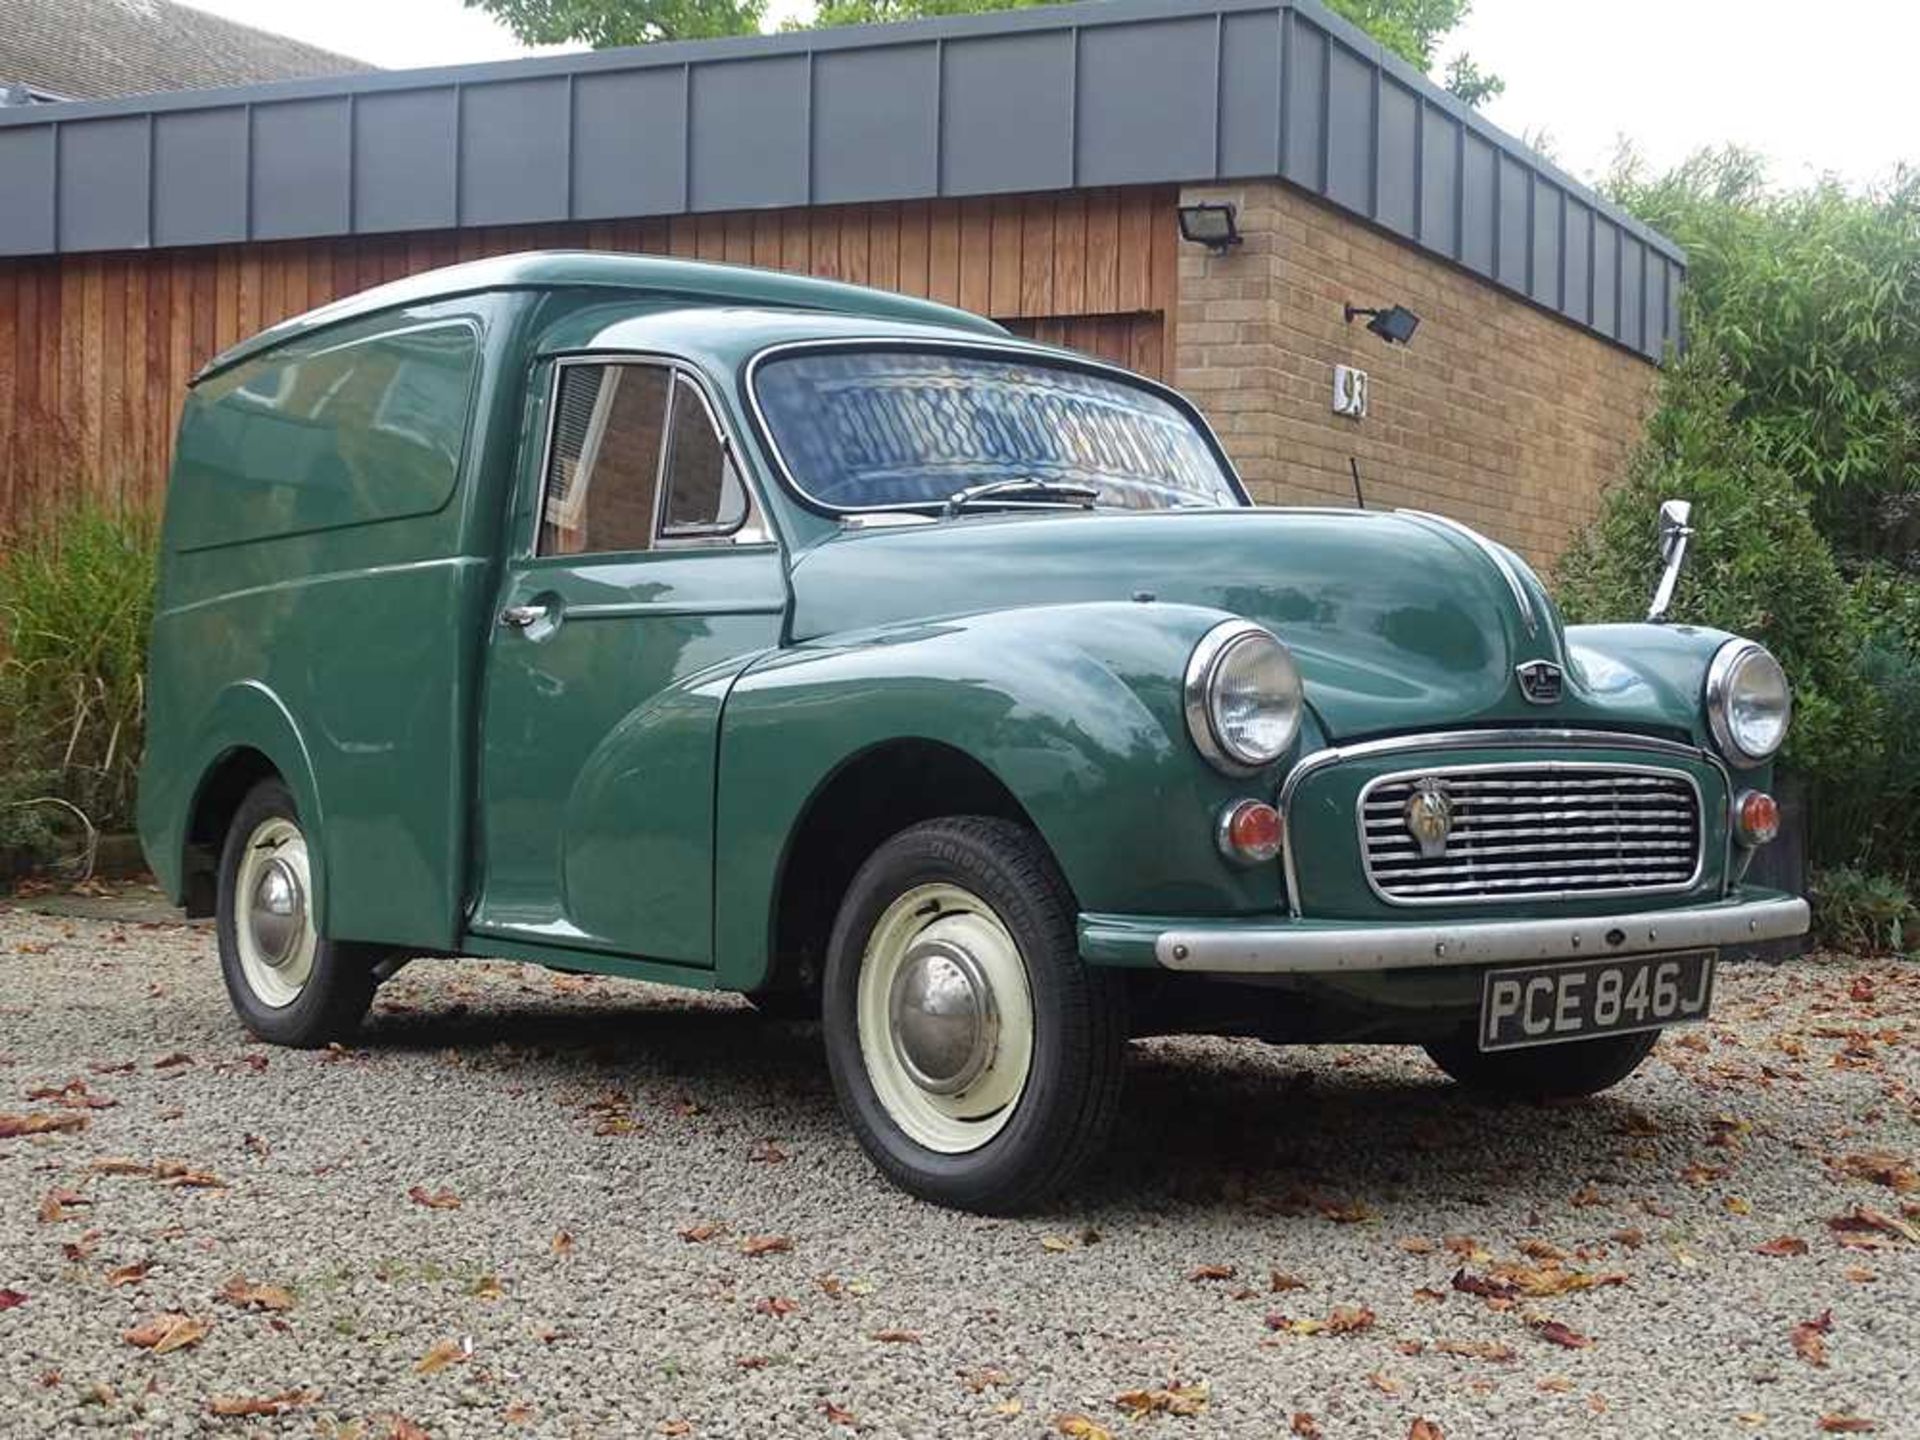 1970 Austin 6 CWT Van Single Family Ownership From New - Image 6 of 45